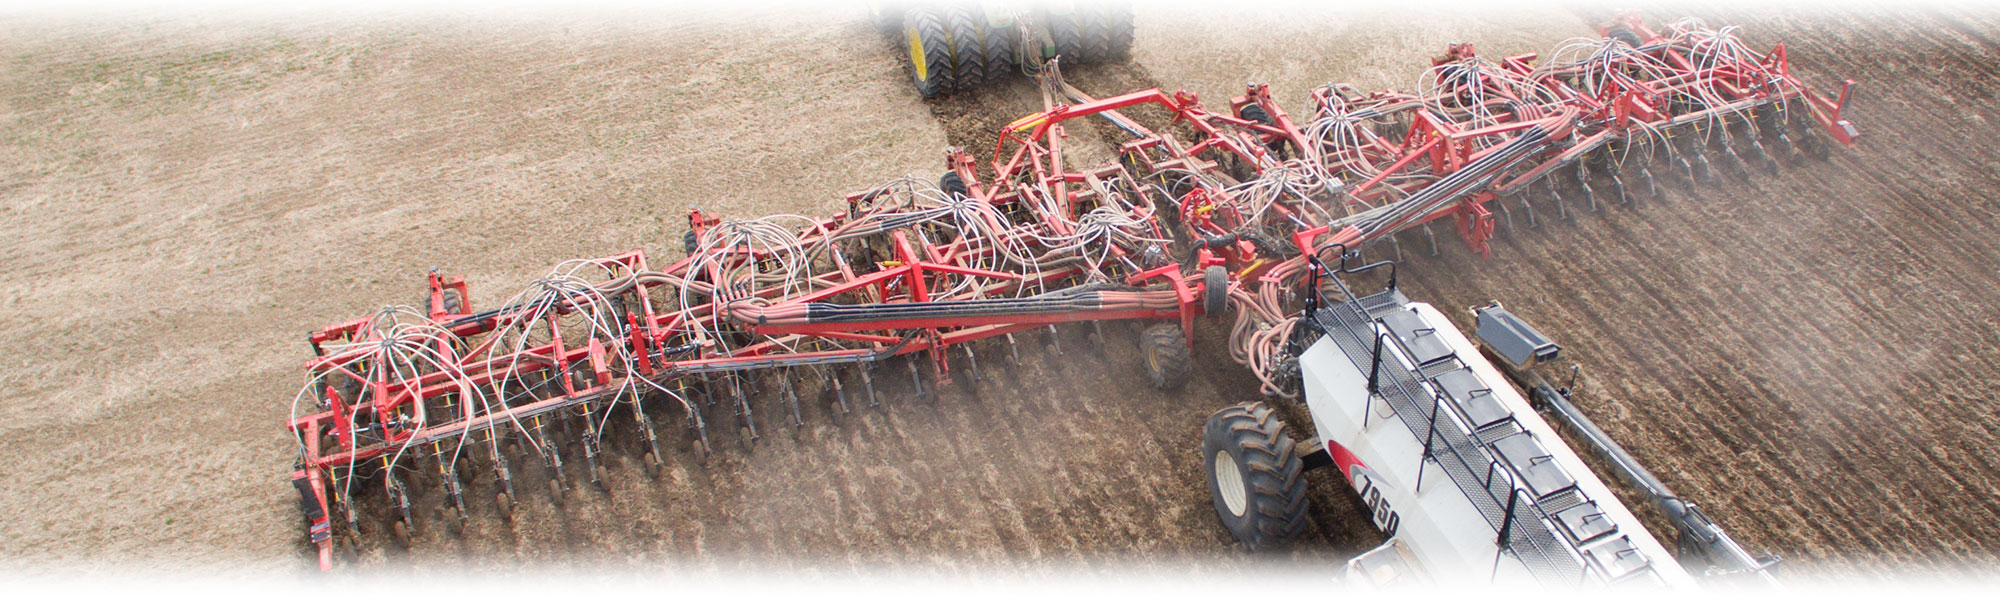 Bourgault 3420 ParaLink Hoe Drill